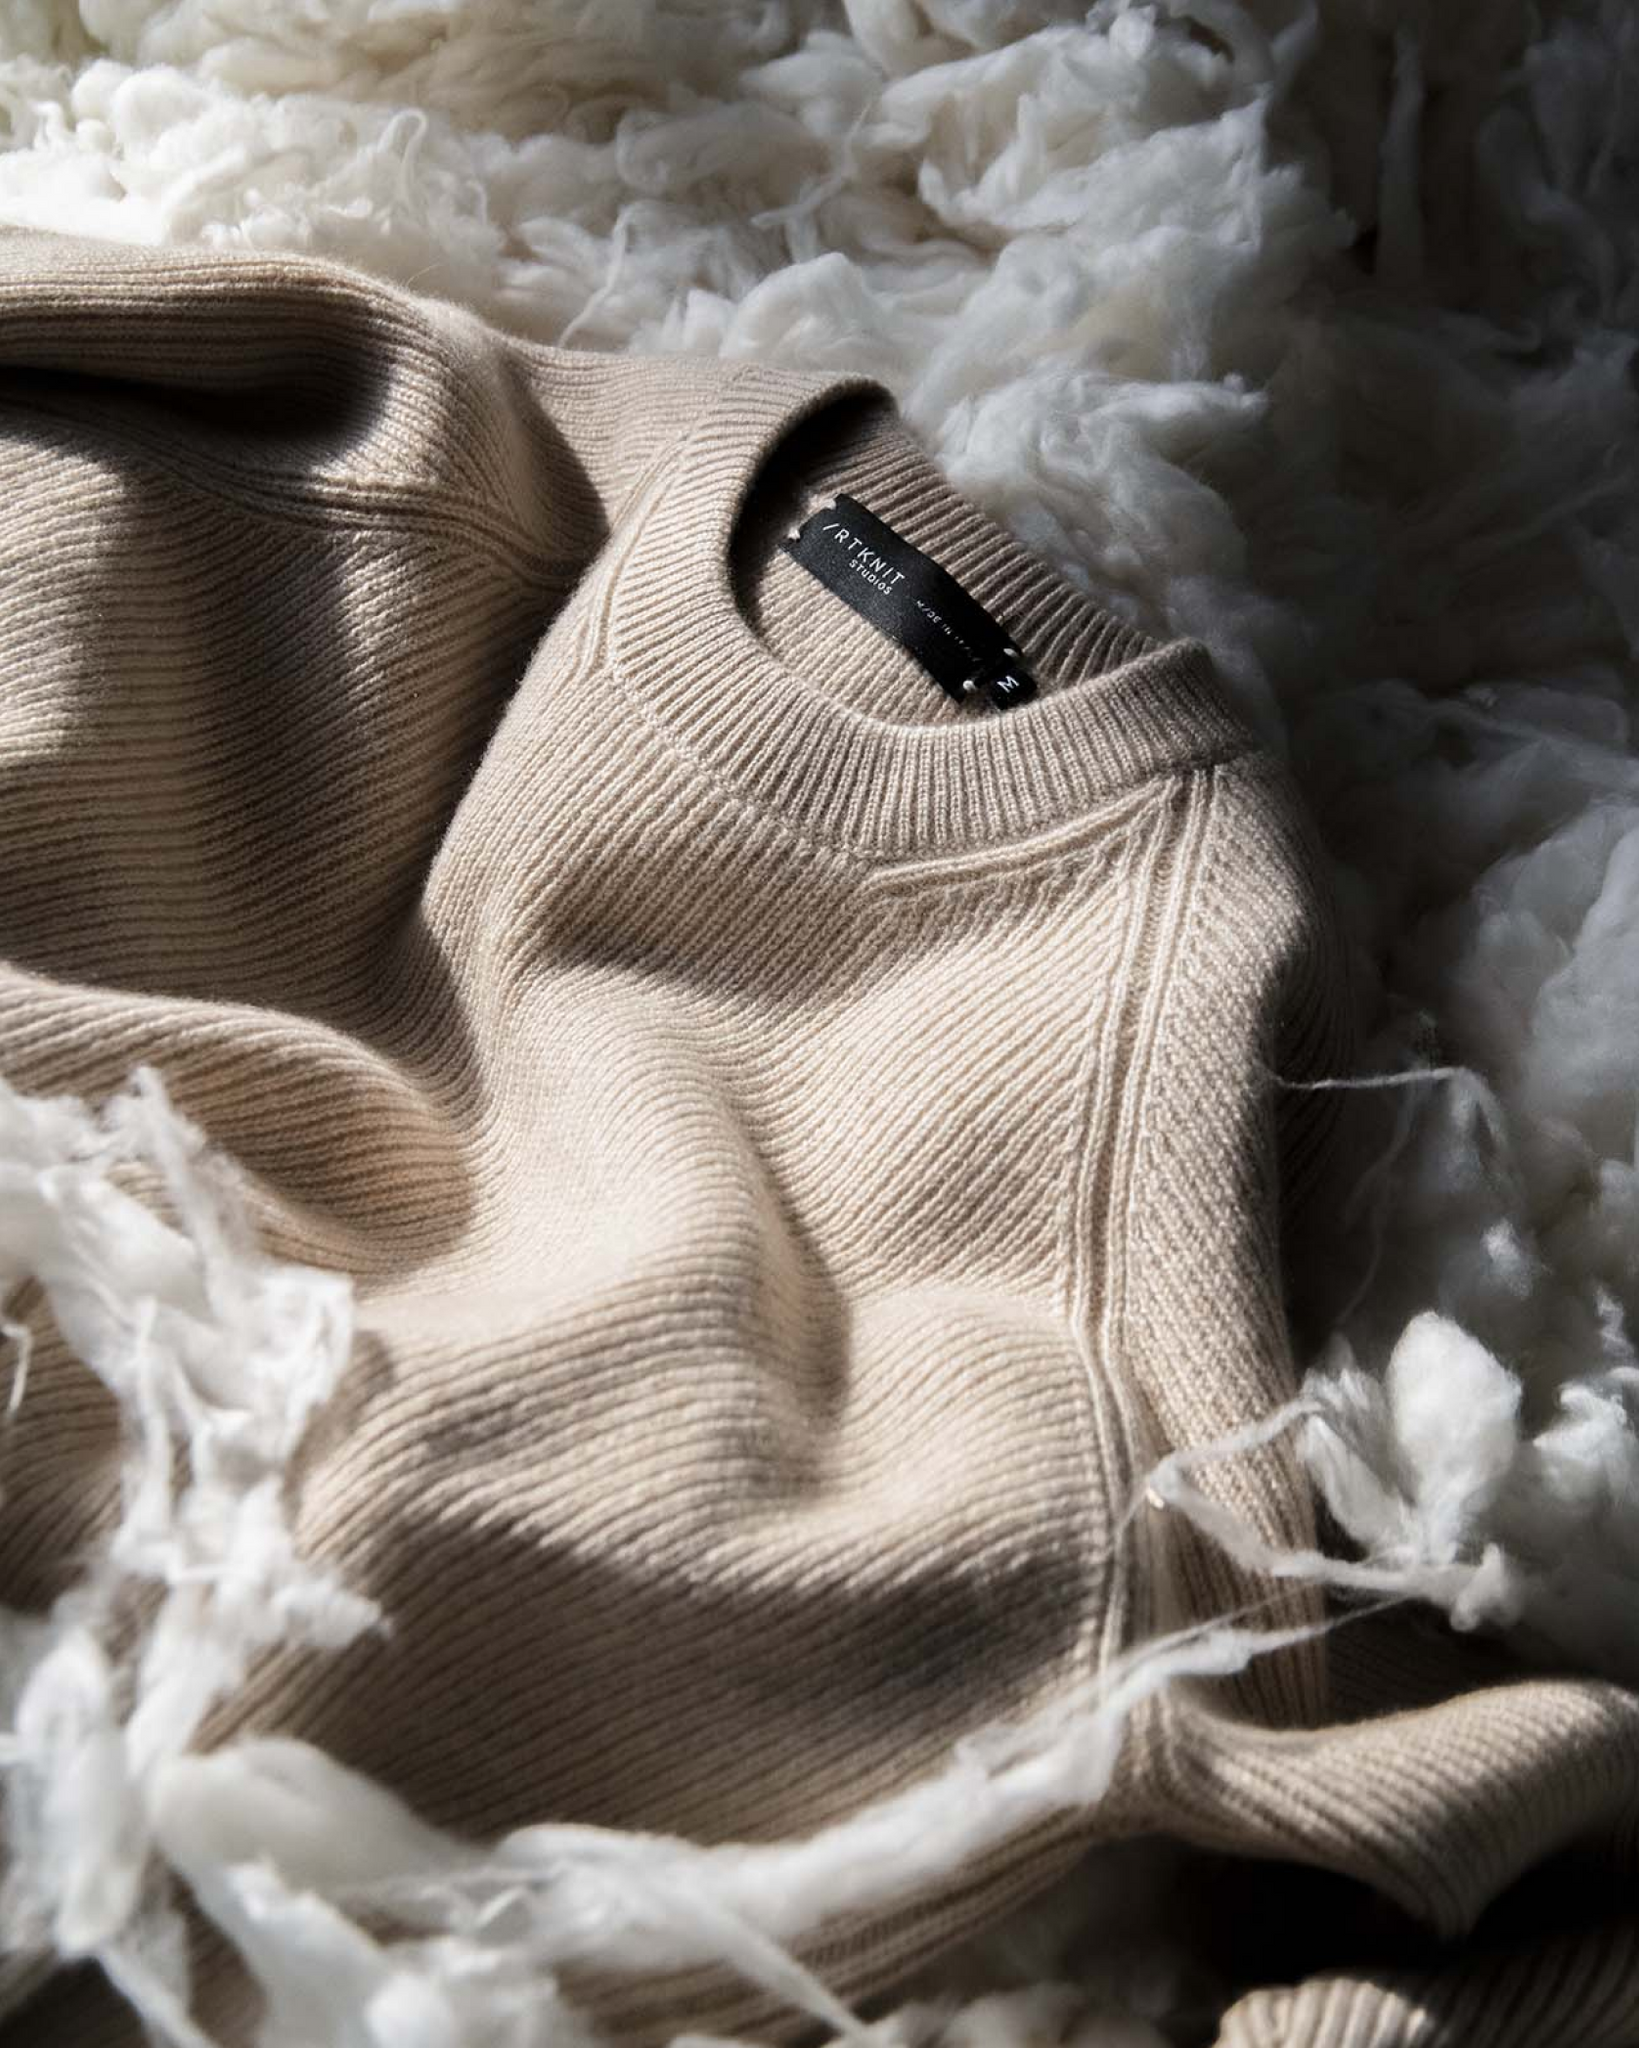 Why are we obsessed with natural fibers?